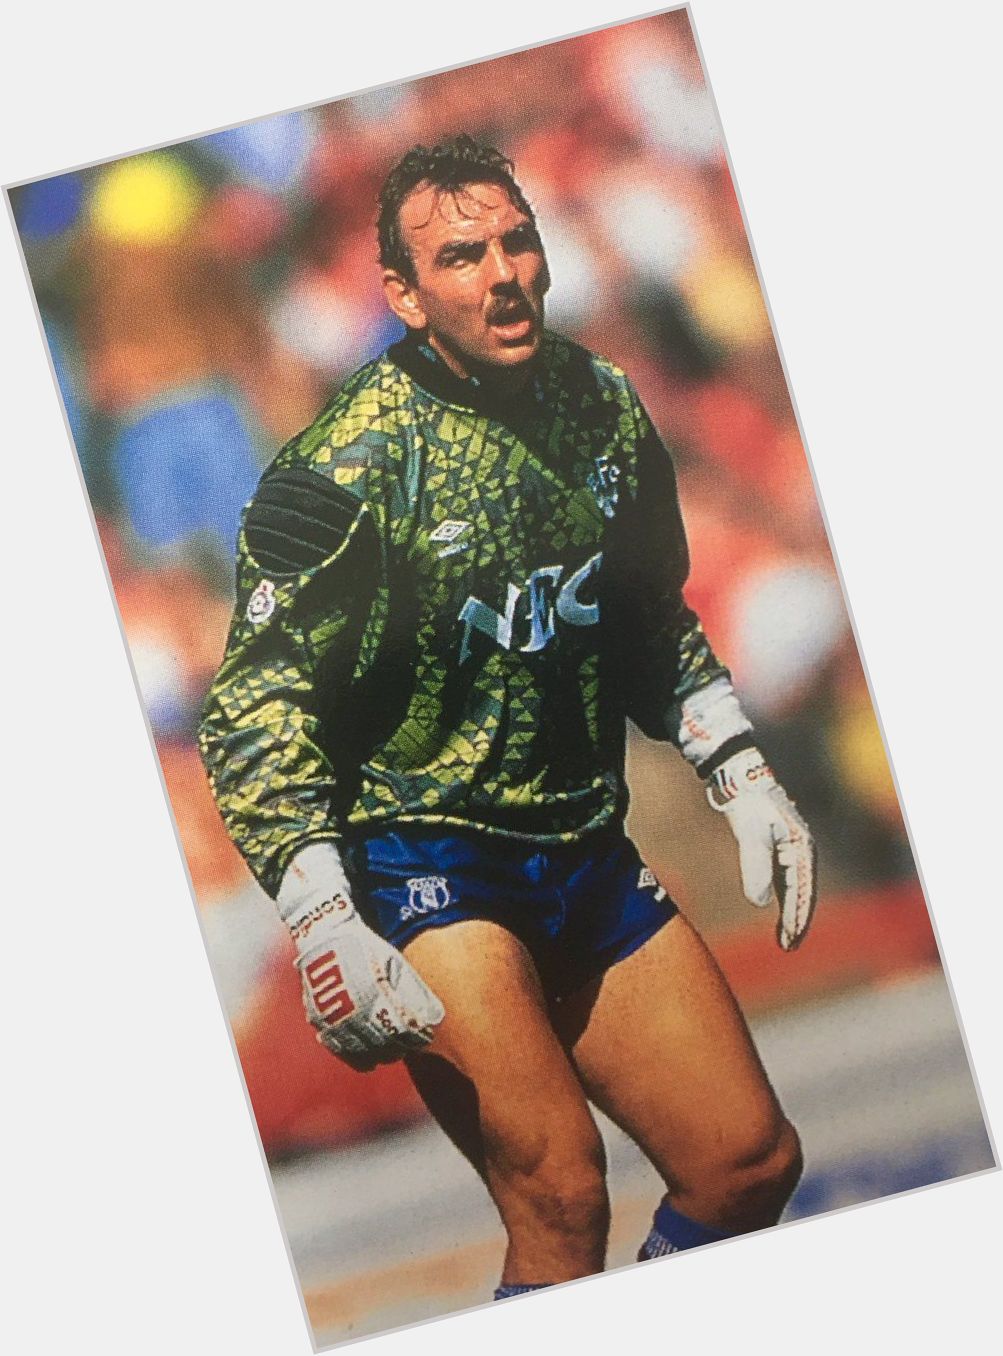 Http://fanpagepress.net/m/N/Neville Southall Dating 2